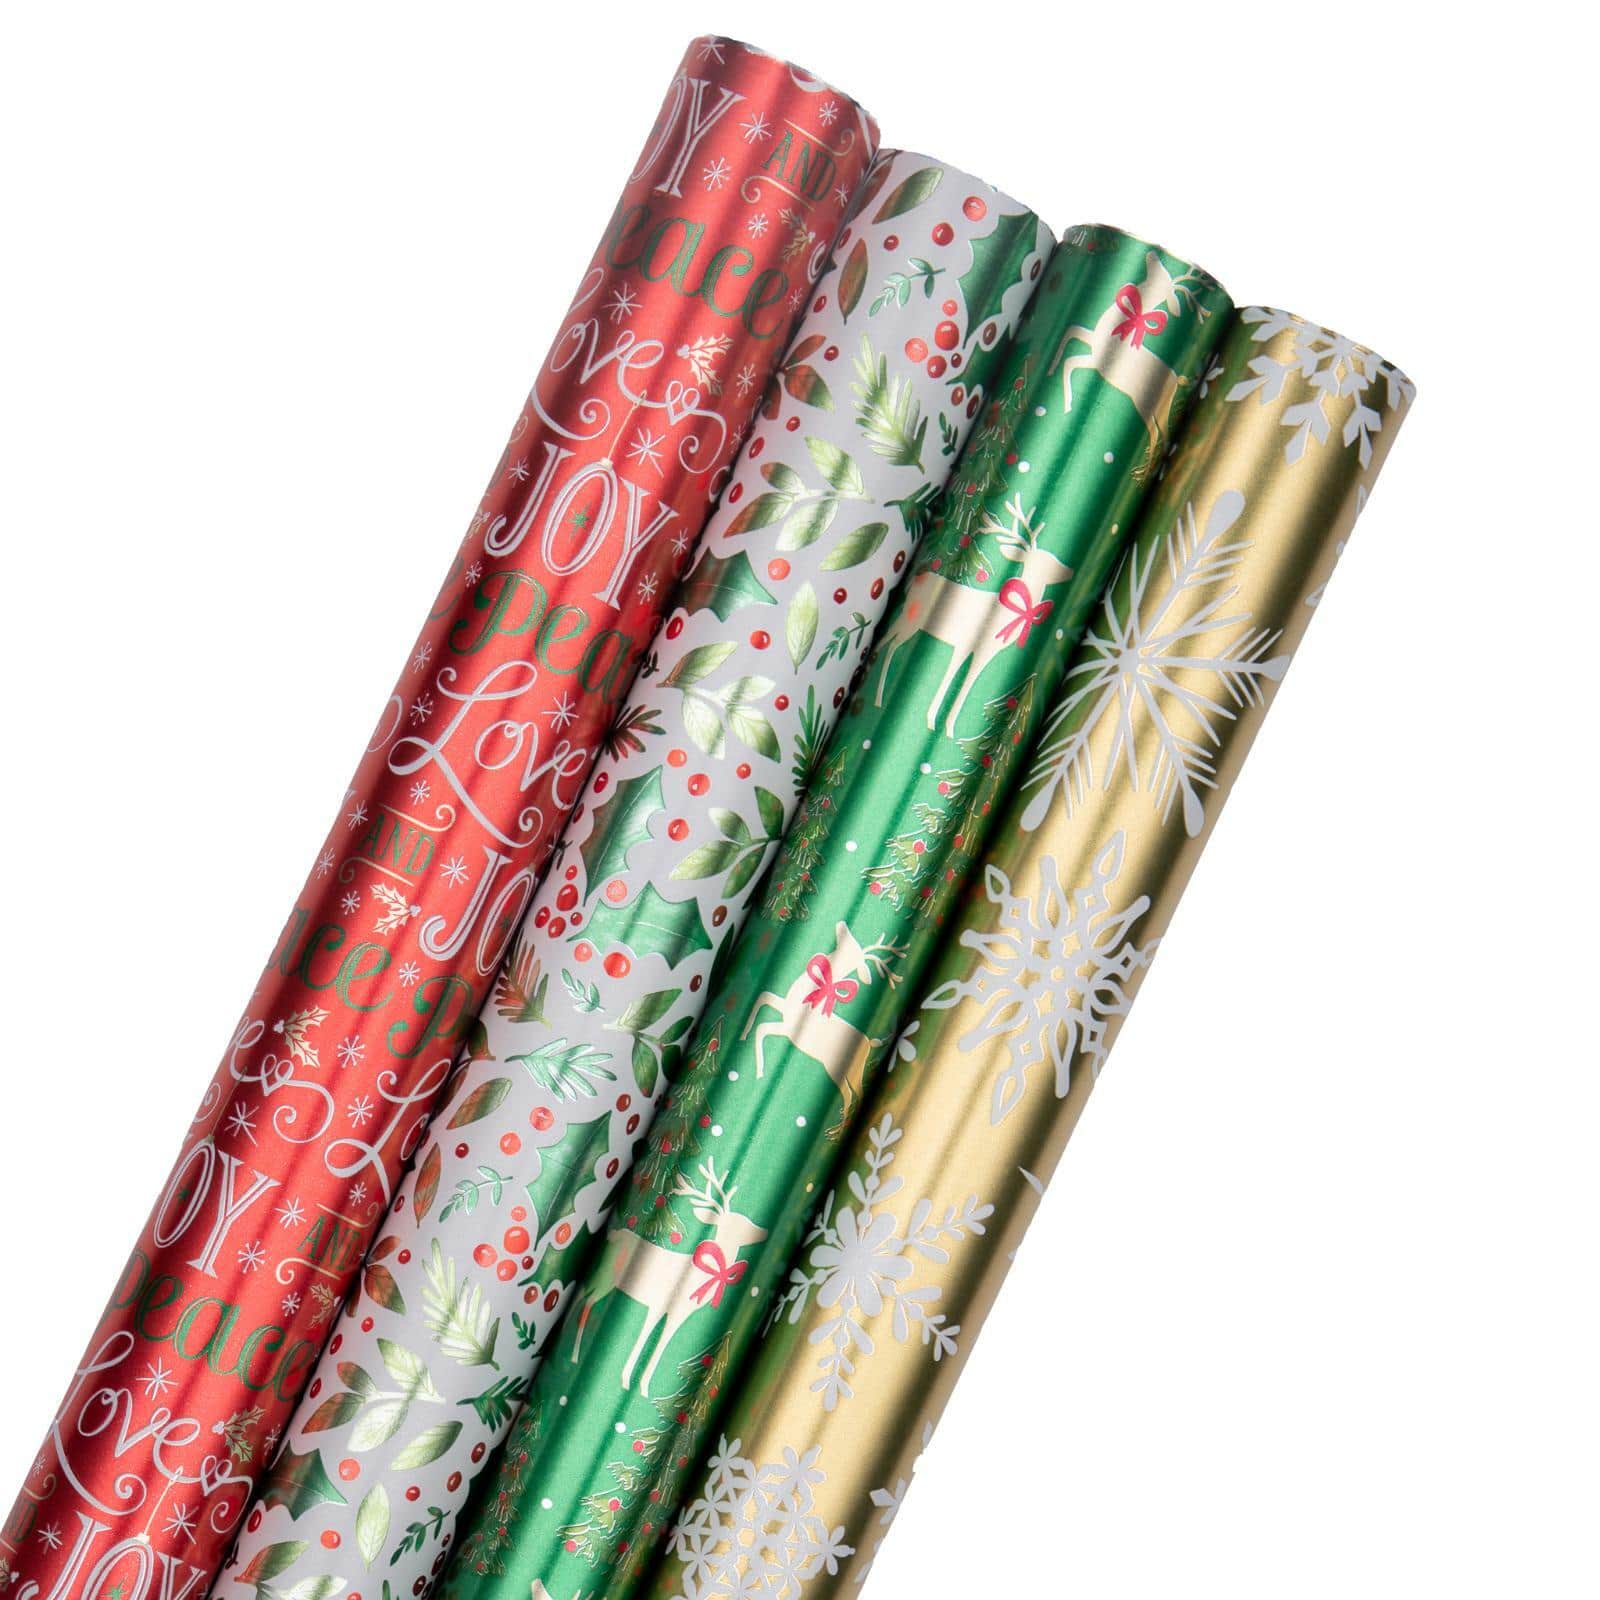 JAM Paper Holographic Merry Christmas Gift Wrap Set, 4ct.